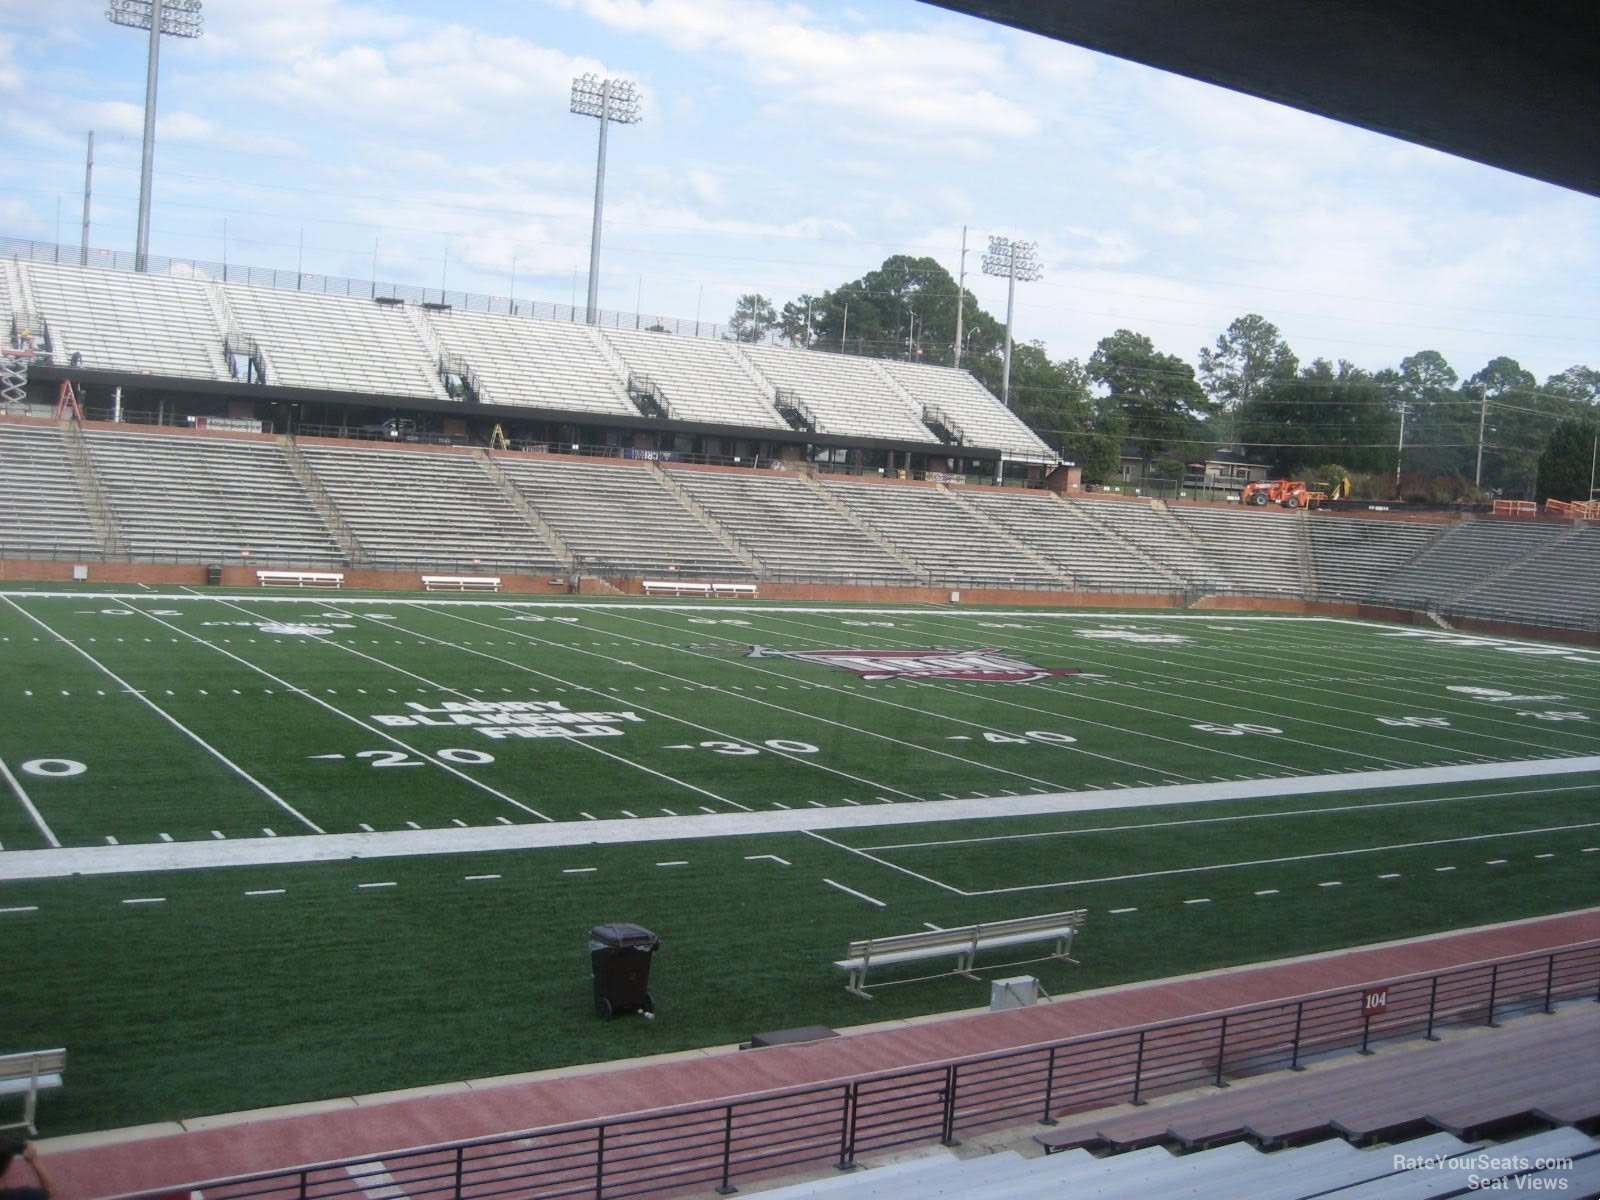 section 102, row 15 seat view  - troy memorial stadium